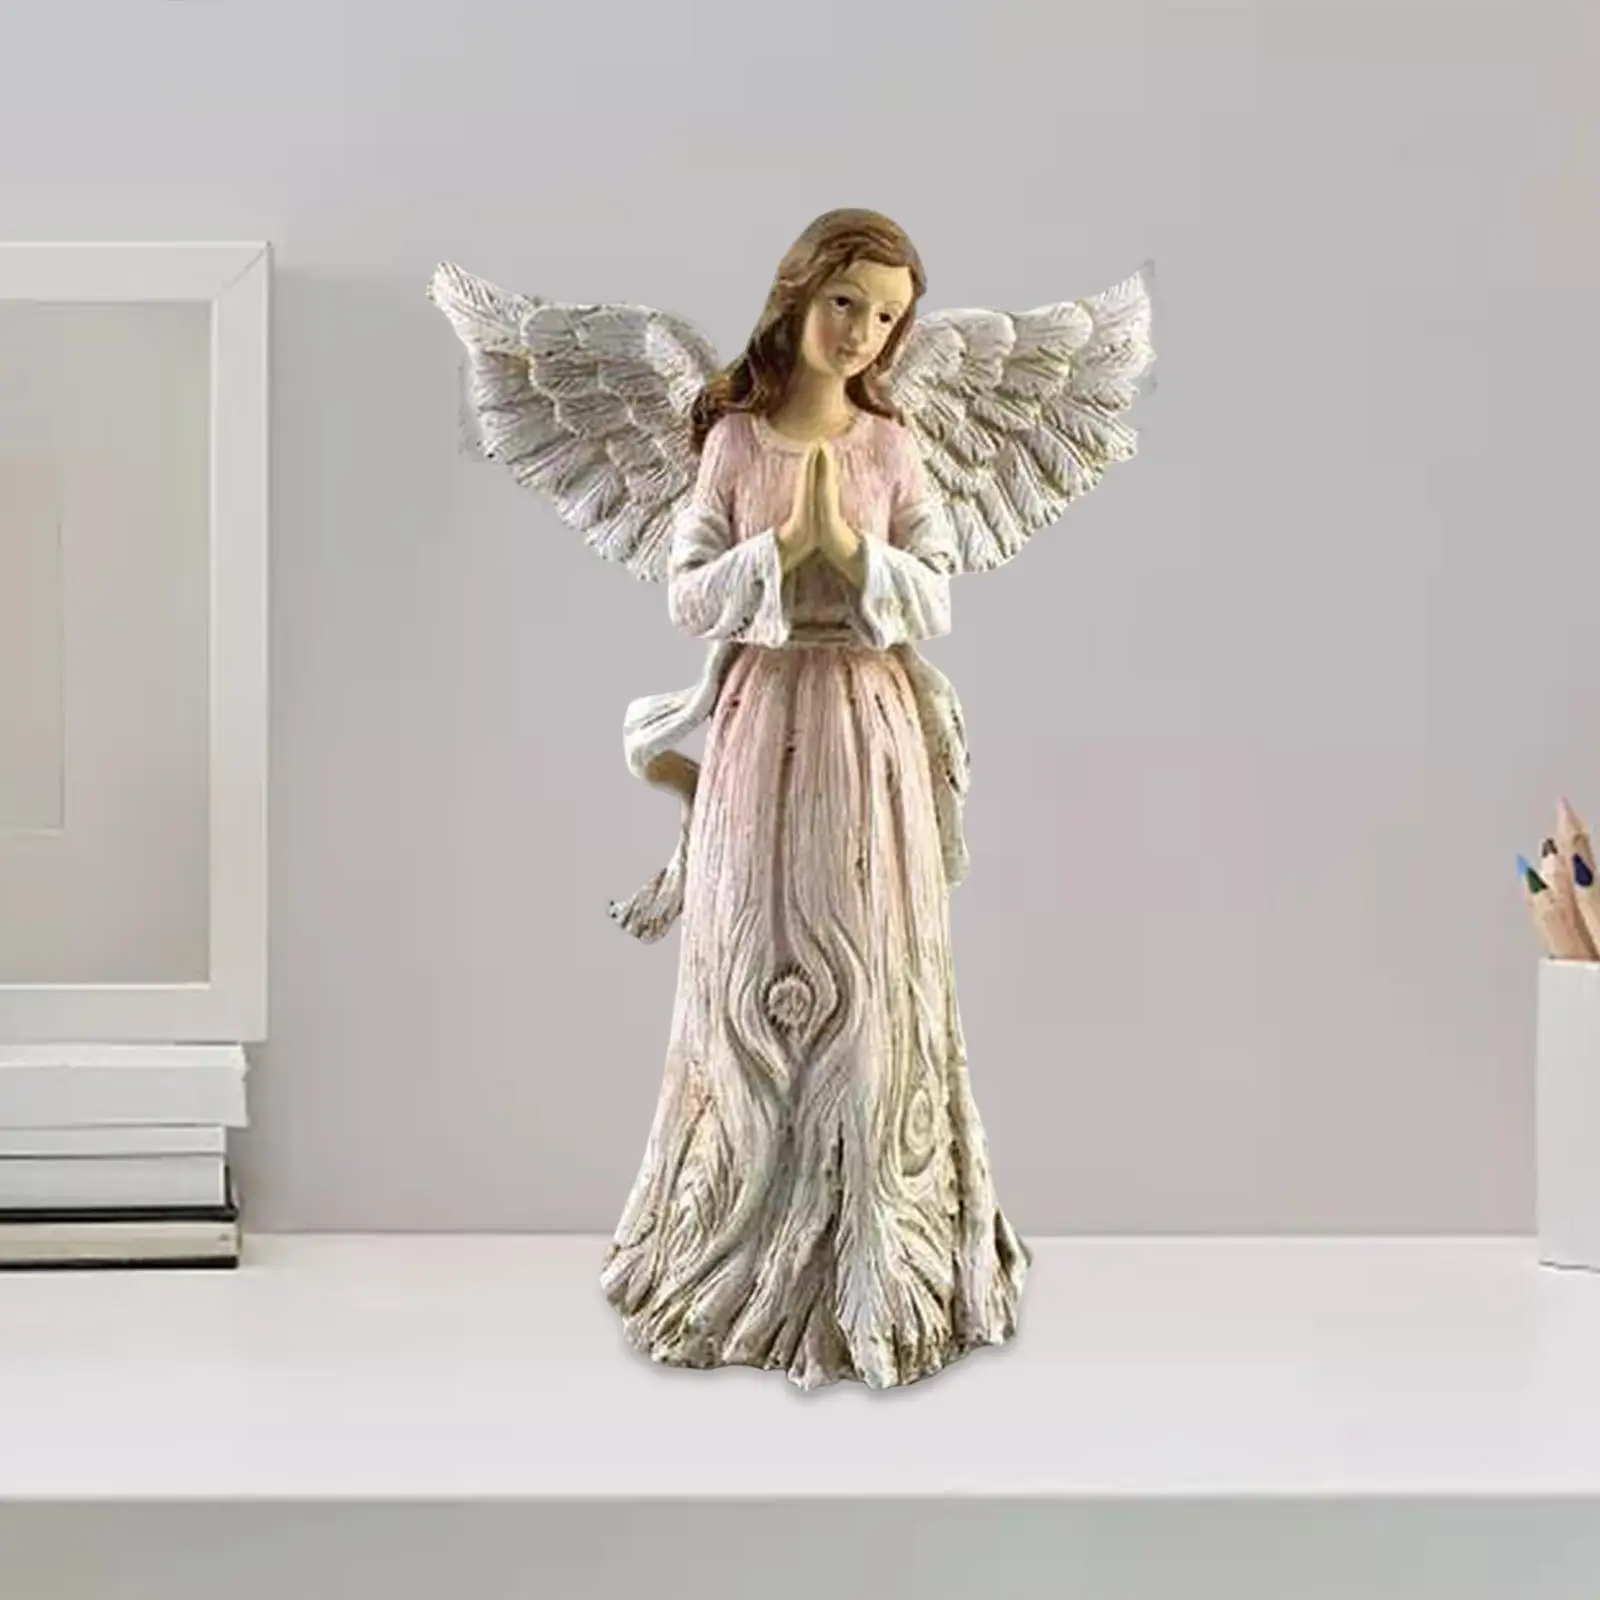 Angel Figurine Resin Modern Artistic Inspirational Gifts Nordic Exquisite Details Tabletop Ornaments Ornaments for Walkway Home